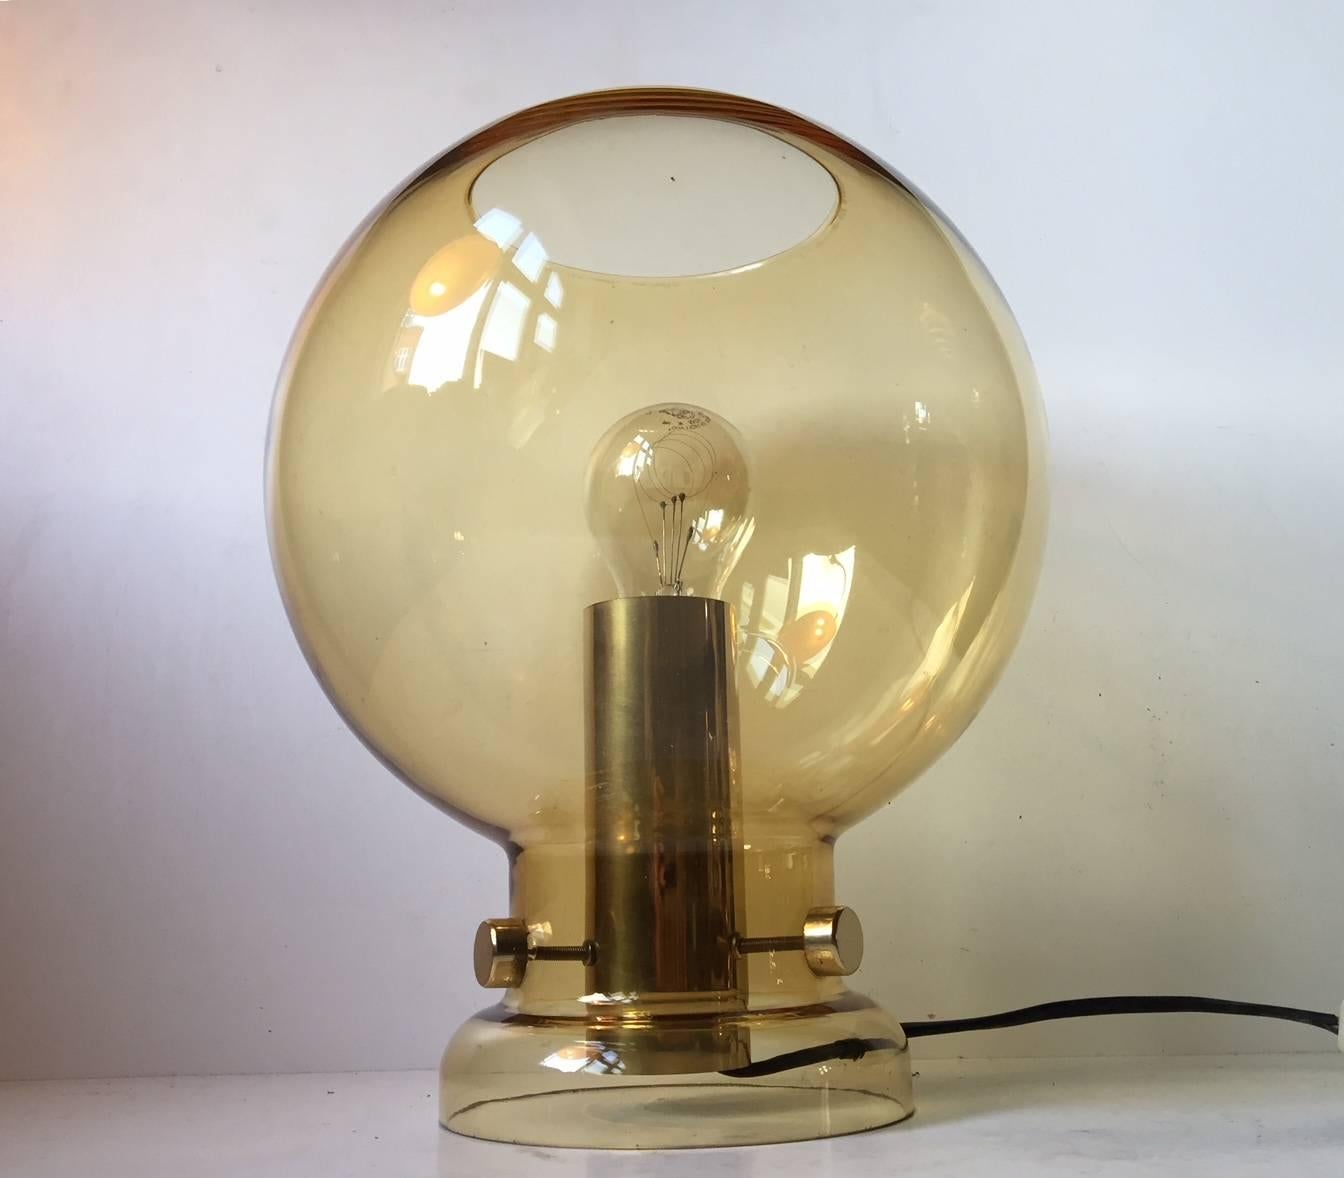 A very rare table lamp designed by Hans-Agne Jakobsson and manufactured by Markaryd AB in Sweden during the 1960s. Composed of yellow toned smoke-glass and gilded brass. Please notice that is has a small chip to the foot/base. Measurements: H: 32